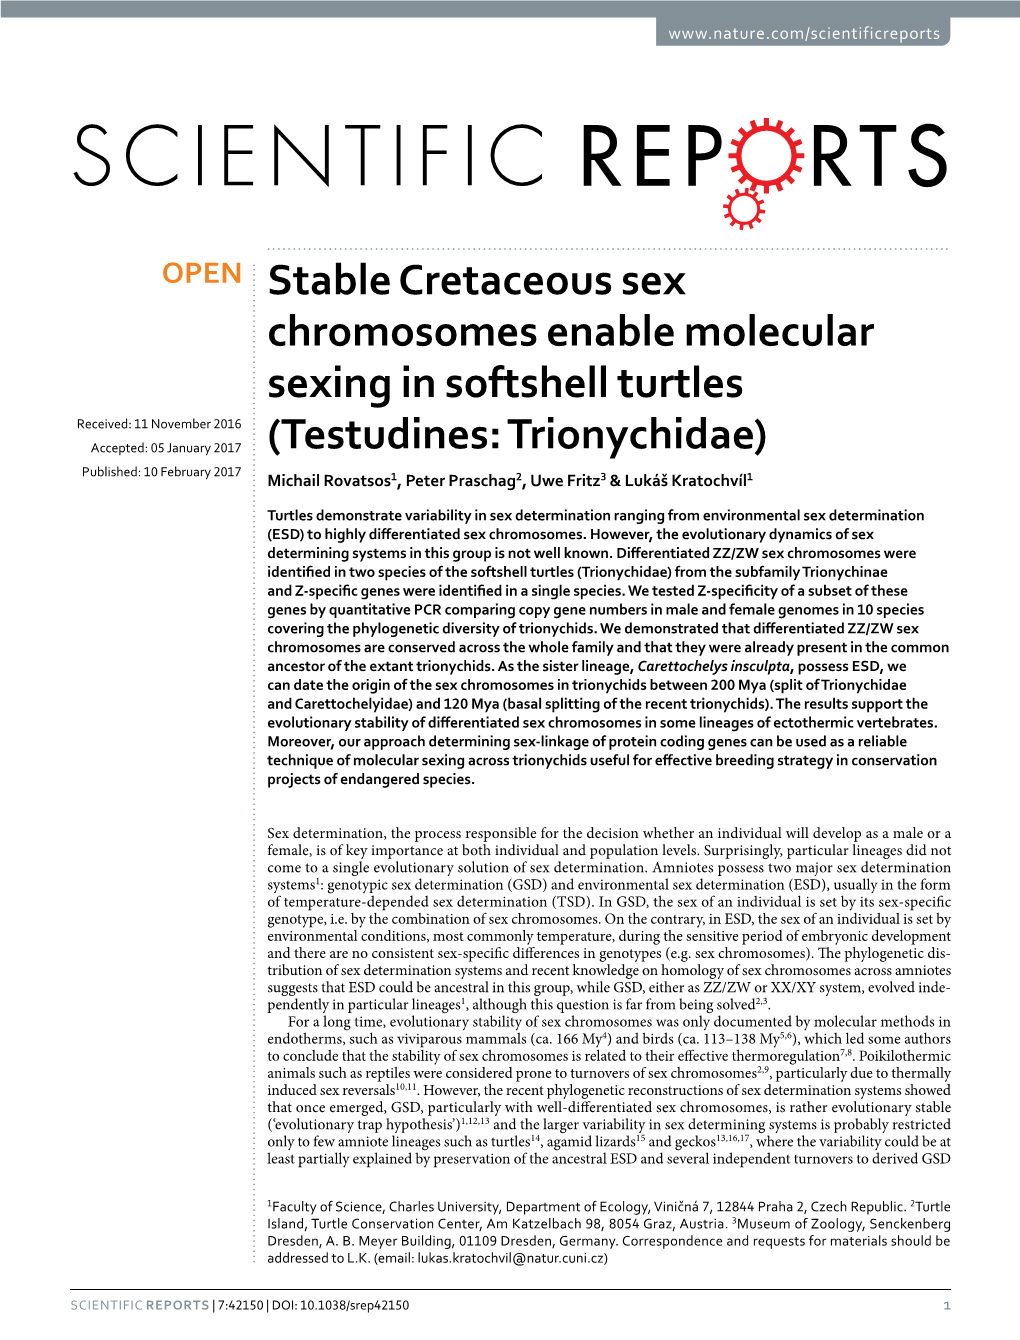 Stable Cretaceous Sex Chromosomes Enable Molecular Sexing in Softshell